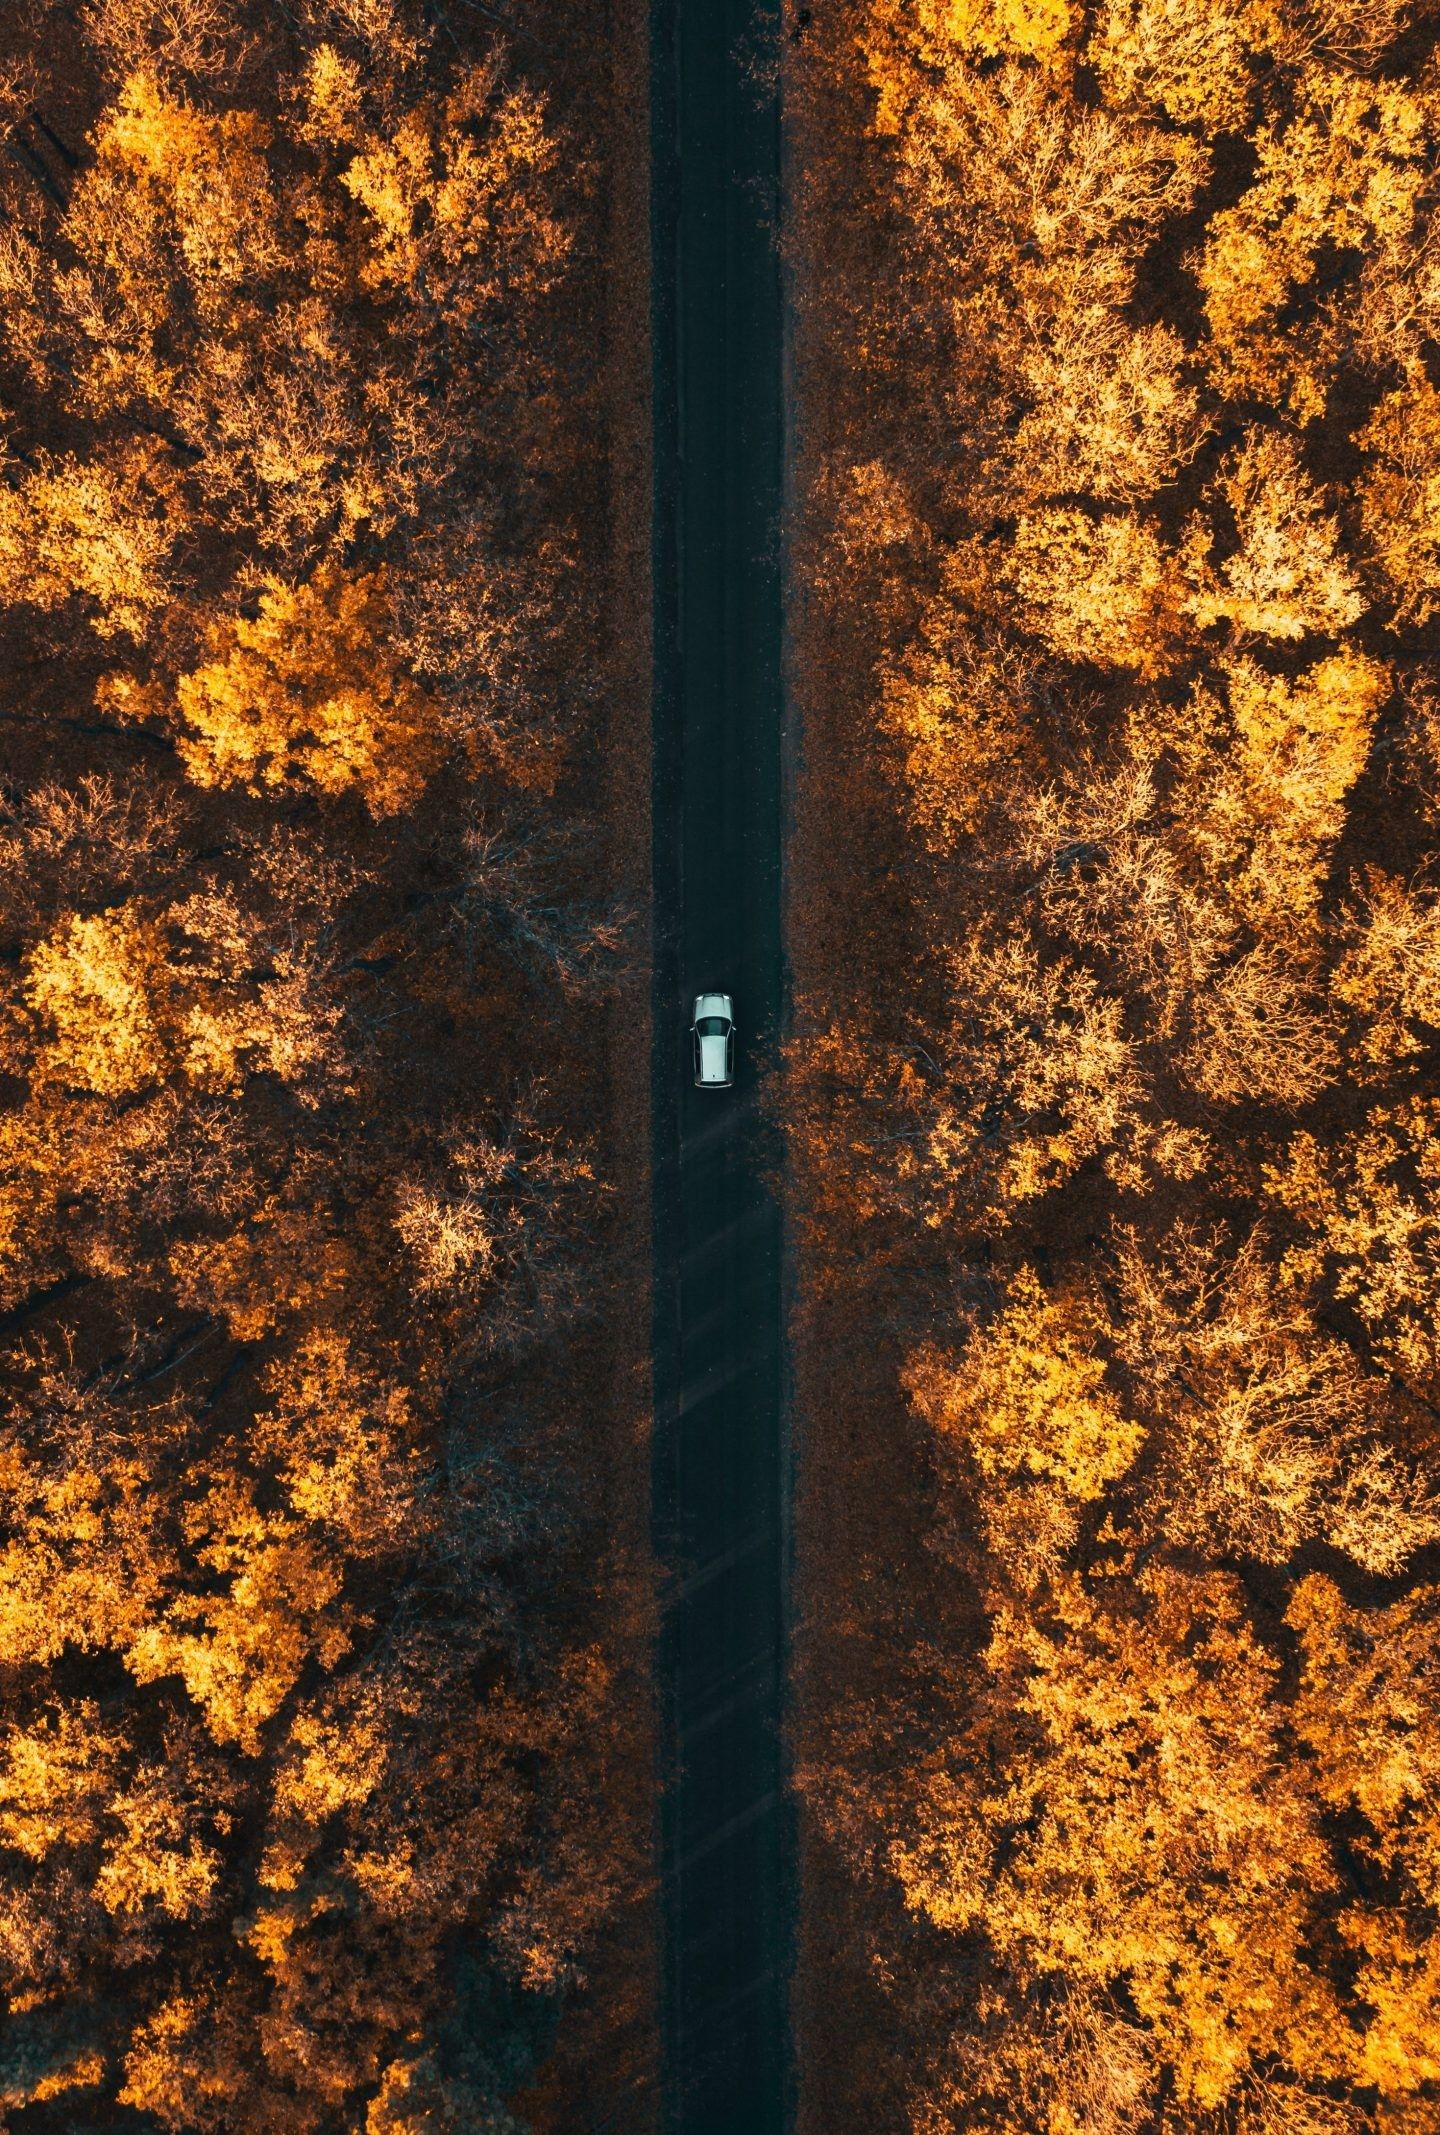 A car on a road surrounded by trees - Vintage fall